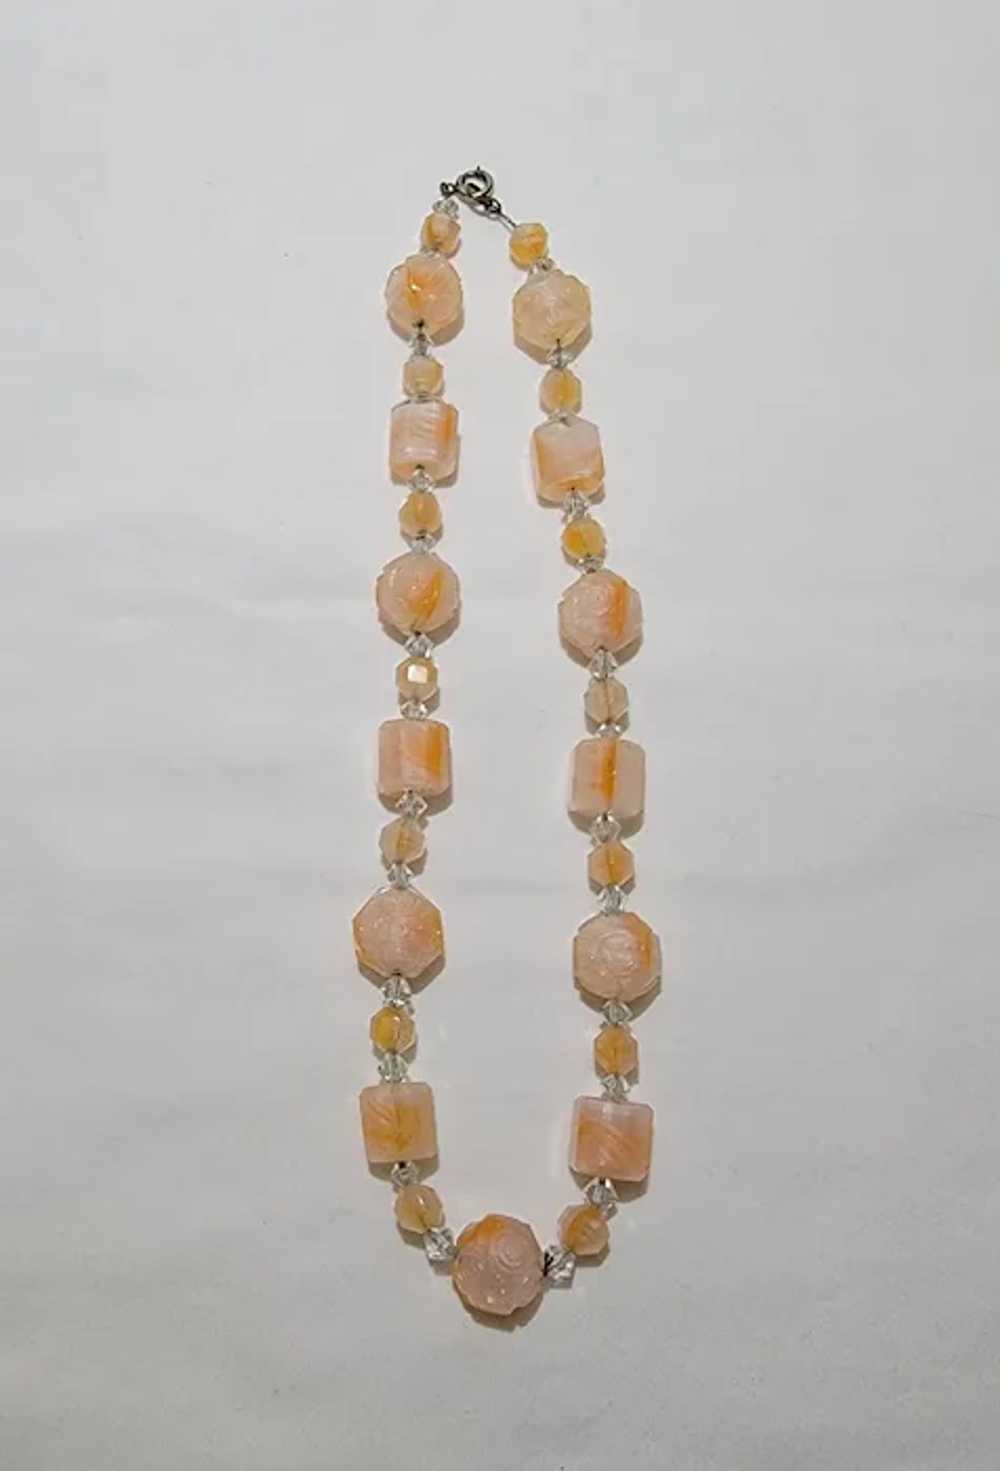 Vintage glass bead necklace - image 9